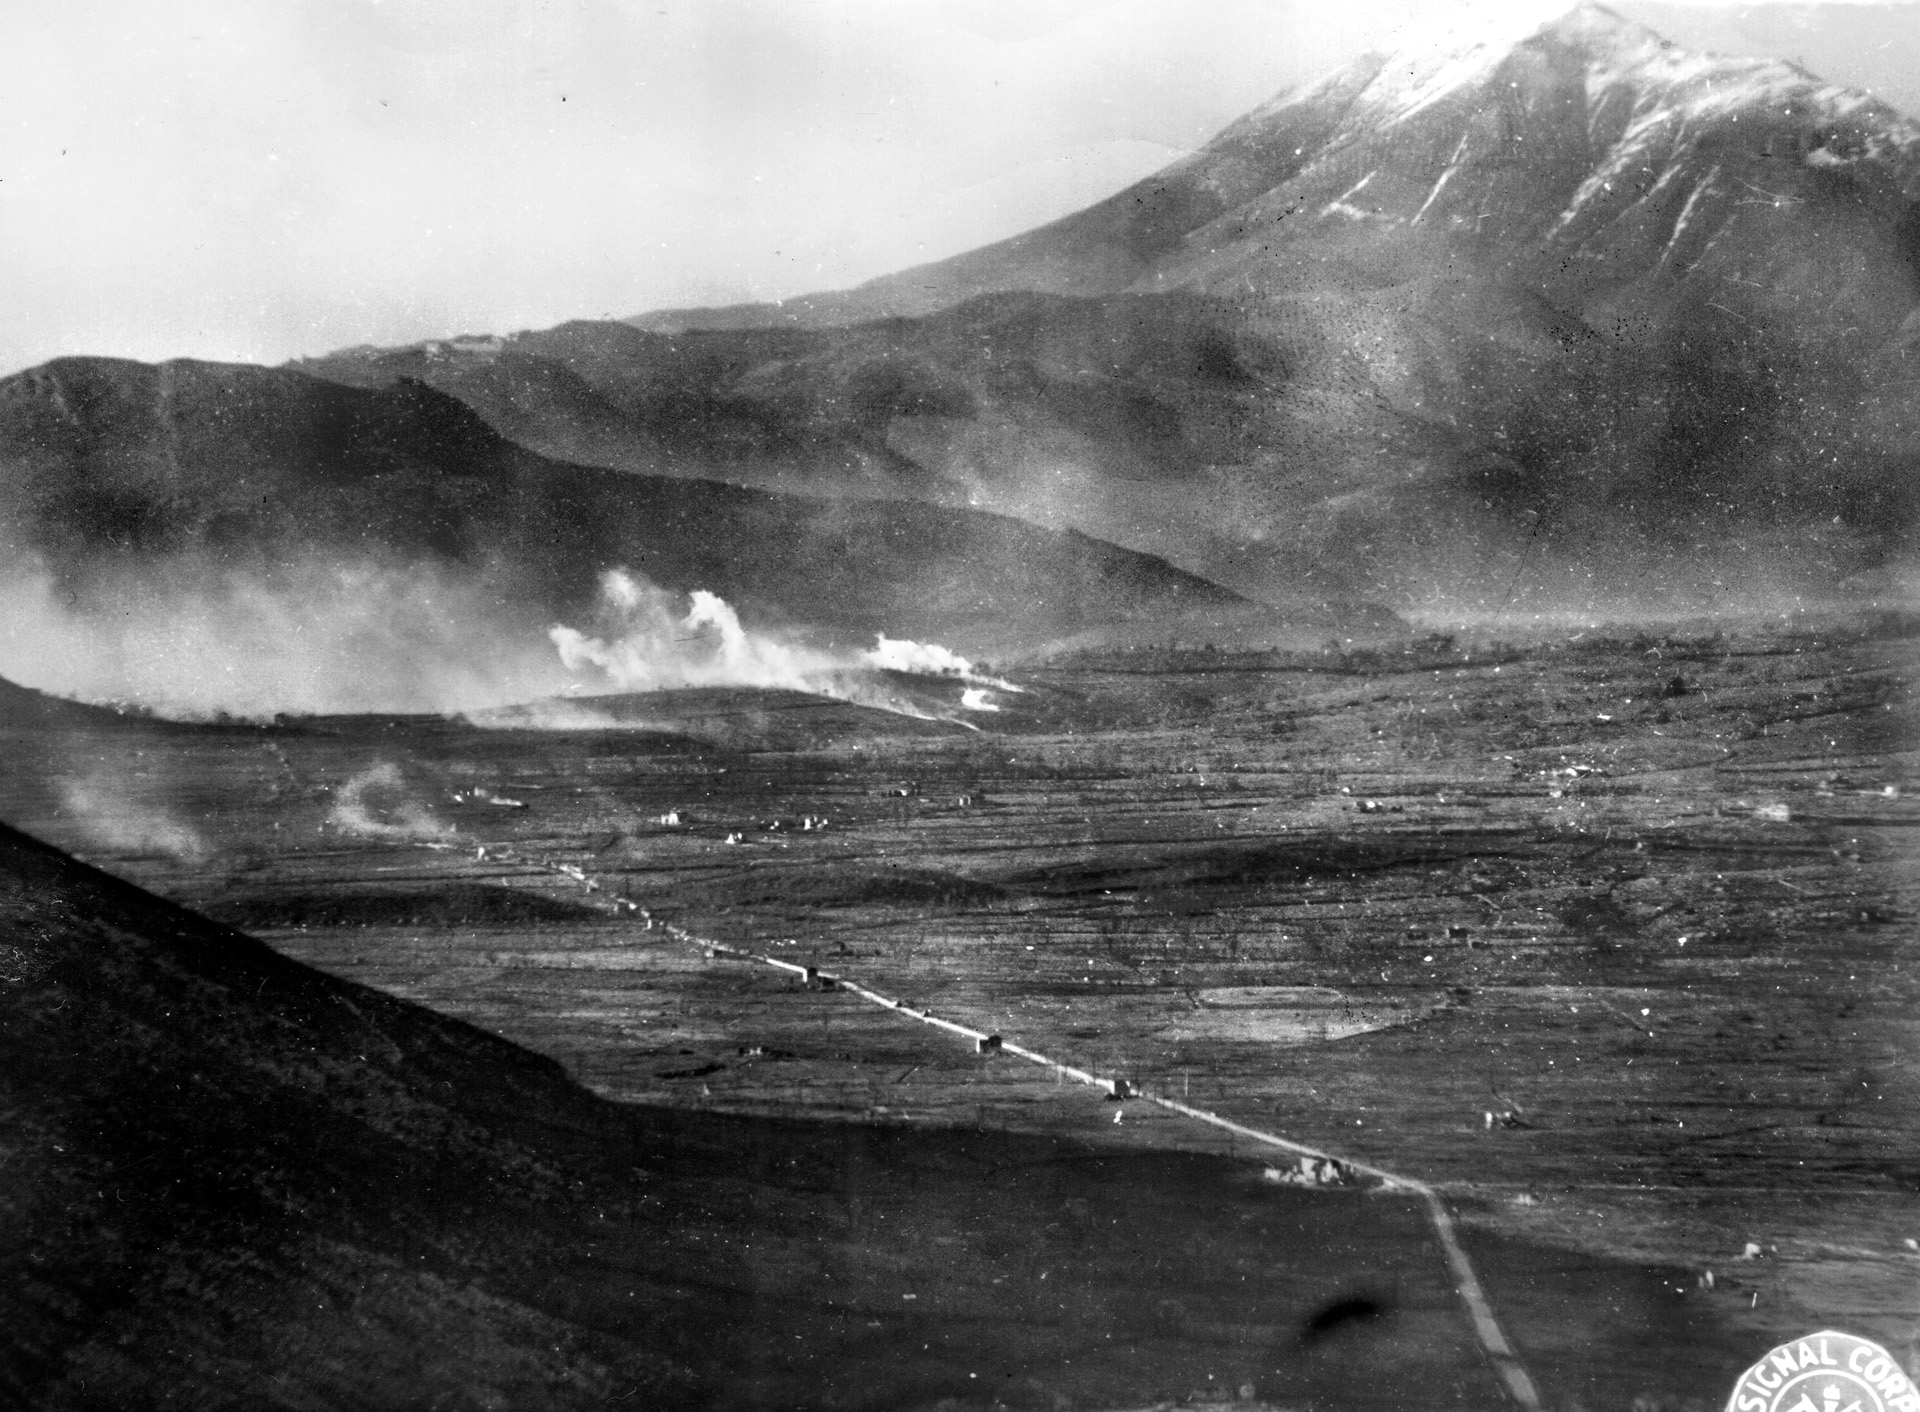 On January 6, 1944, the third day of the assault on Mount Porchia, American artillery pounds German positions in preparation for another attempt to take the promontory. 